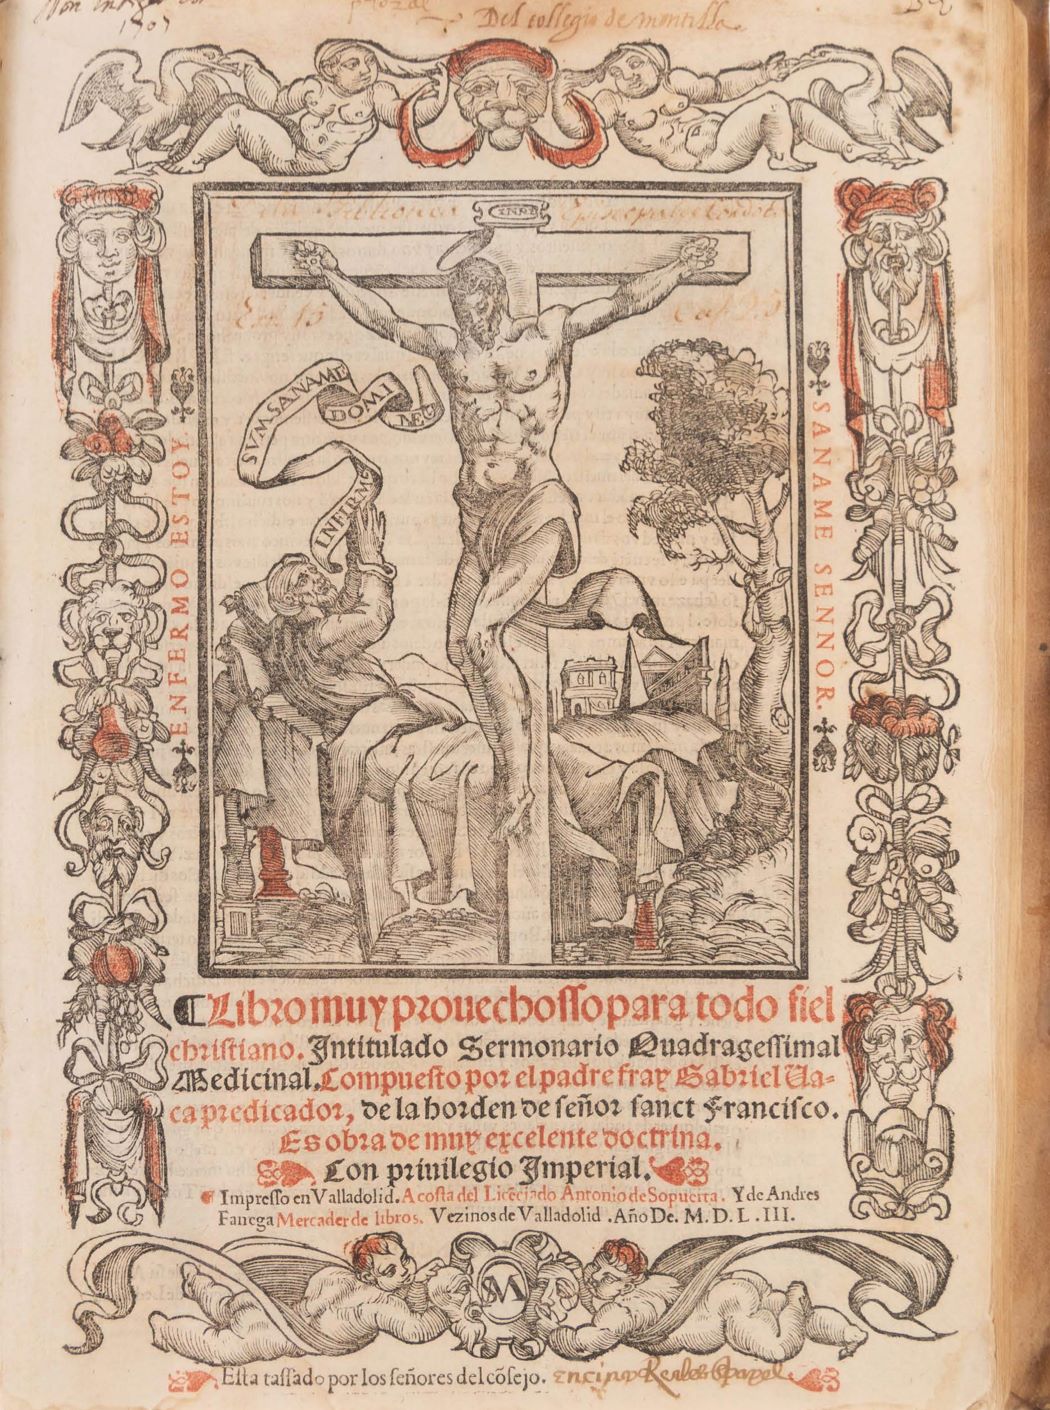 A volume's title page featuring a woodcut overprinted in red depicting a bed-bound invalid appealing to Christ on the cross